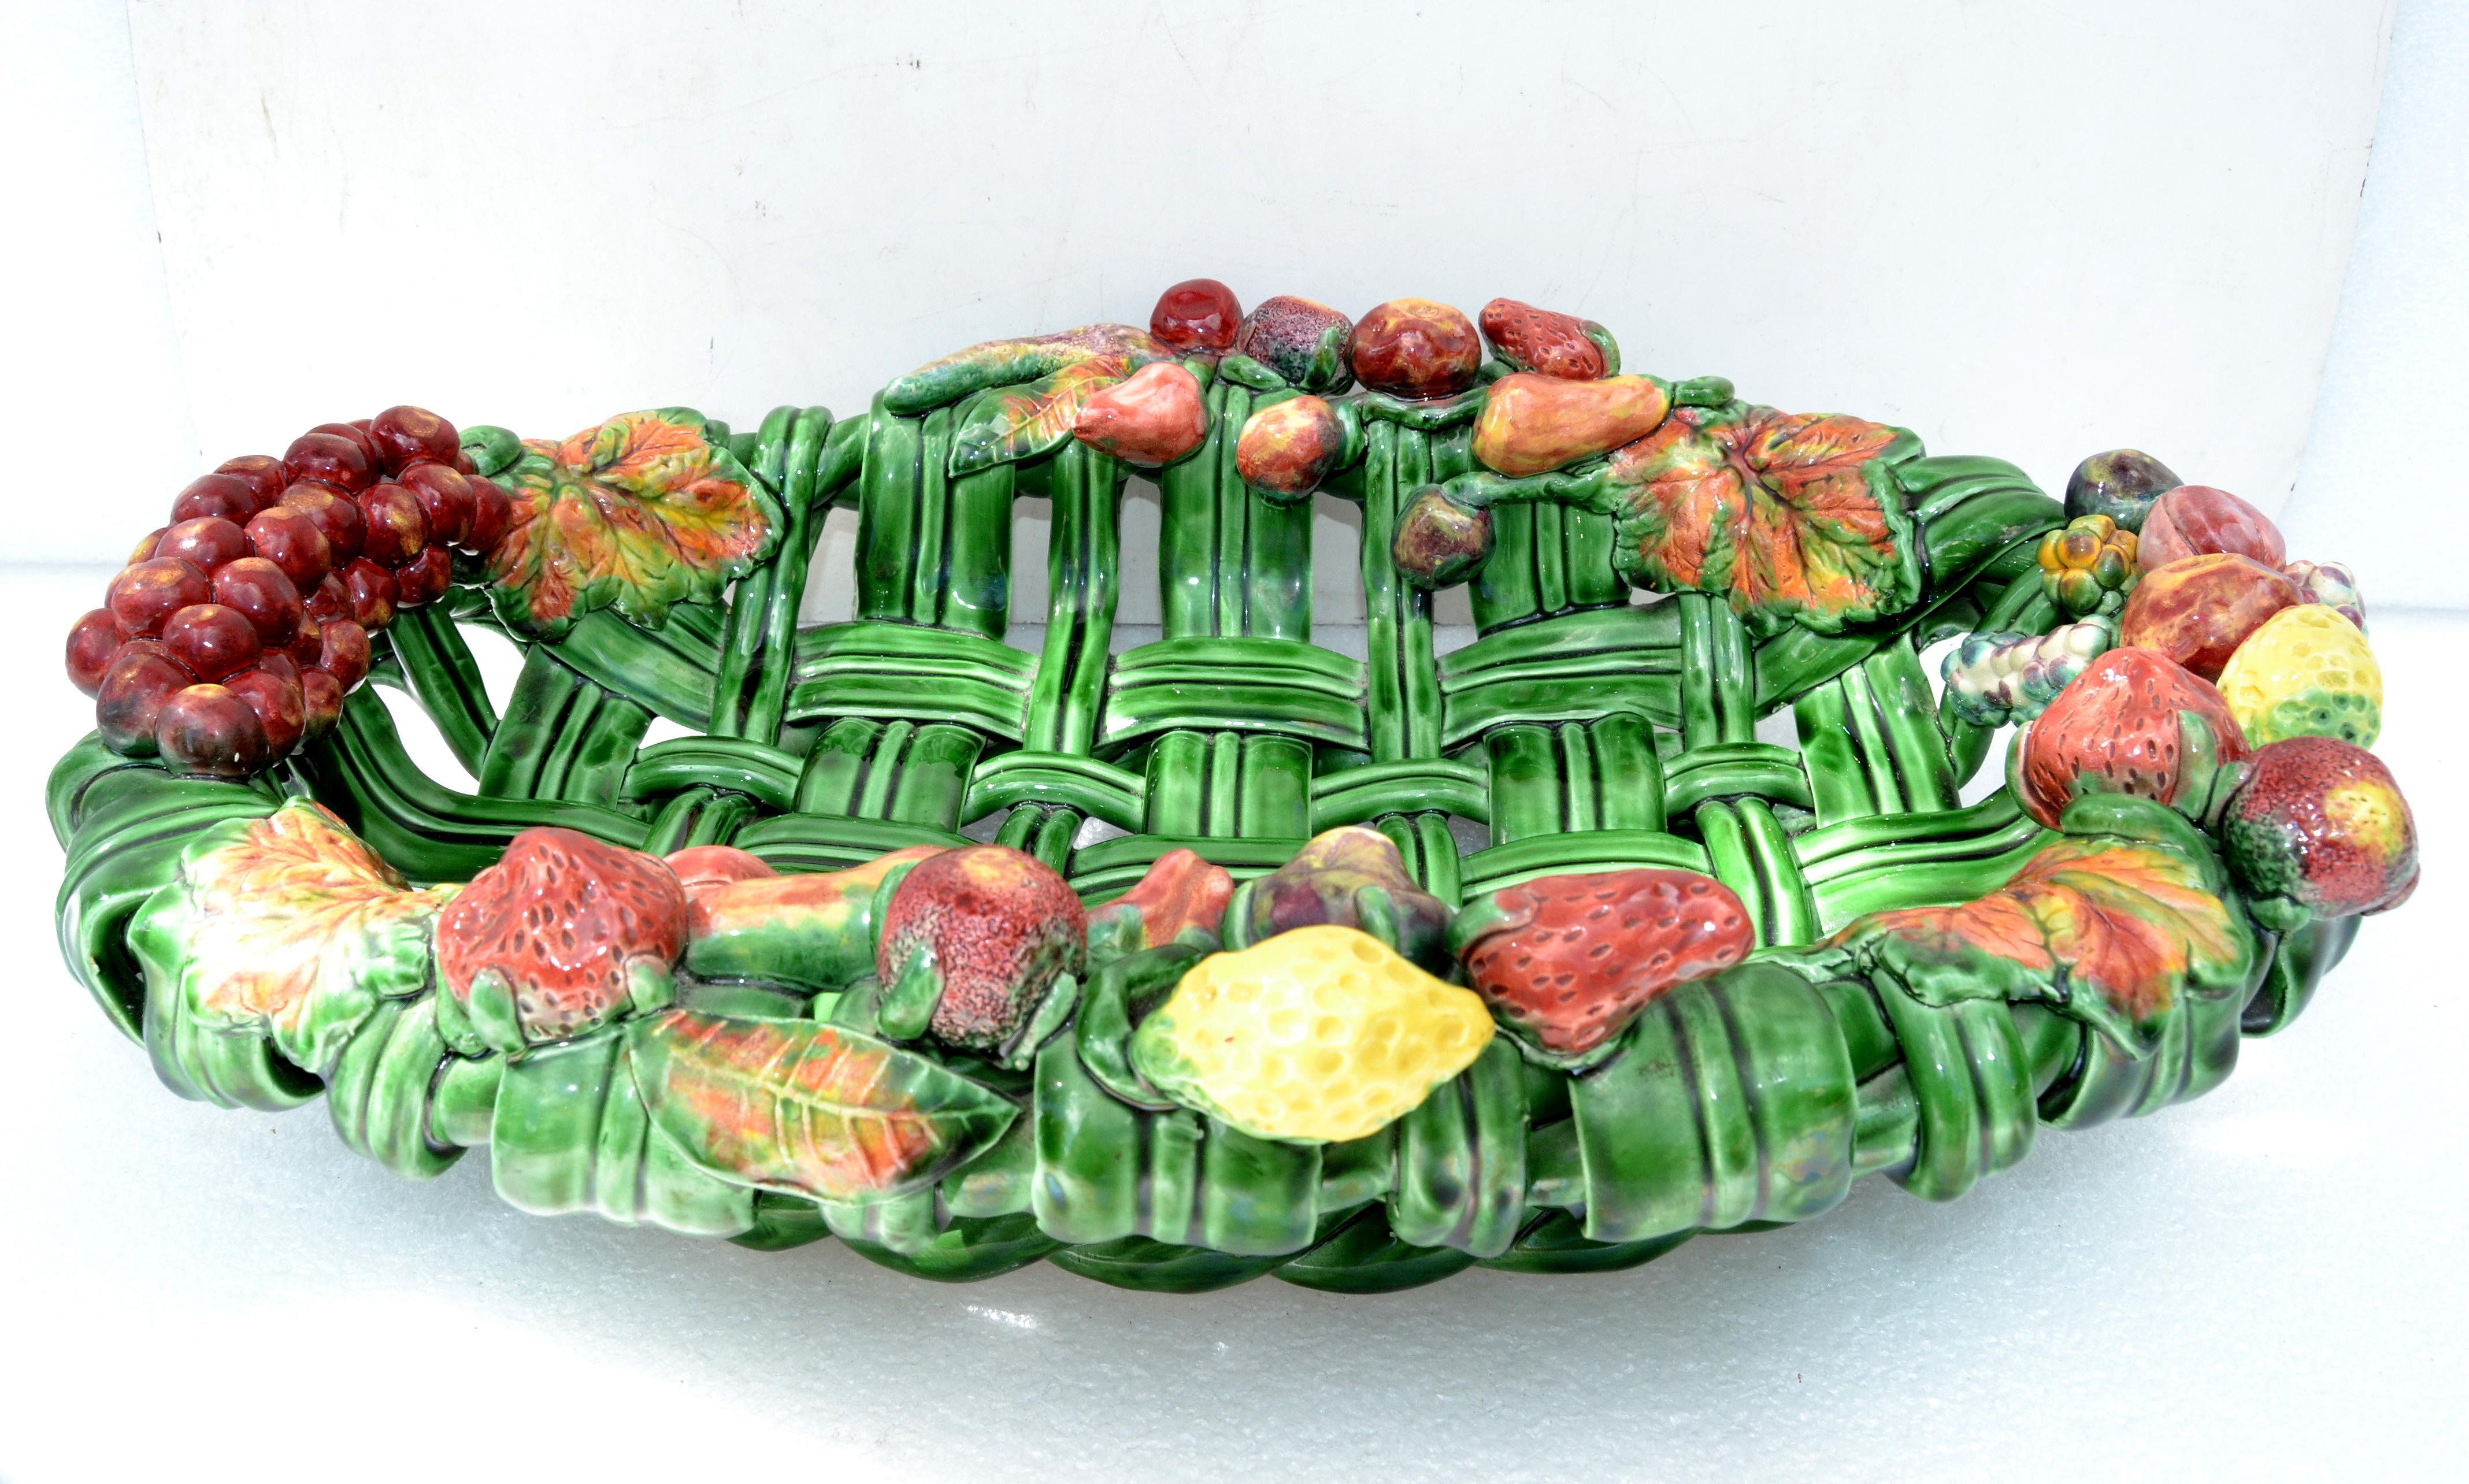 Large oval Mid-Century Modern woven ceramic, Pottery in Emerald Green from Vallauris, small village near the French Riviera.
Depicting a variety of Fruits, like strawberry in different colors.
Marked underneath; Made In France, HENY. 
Great for